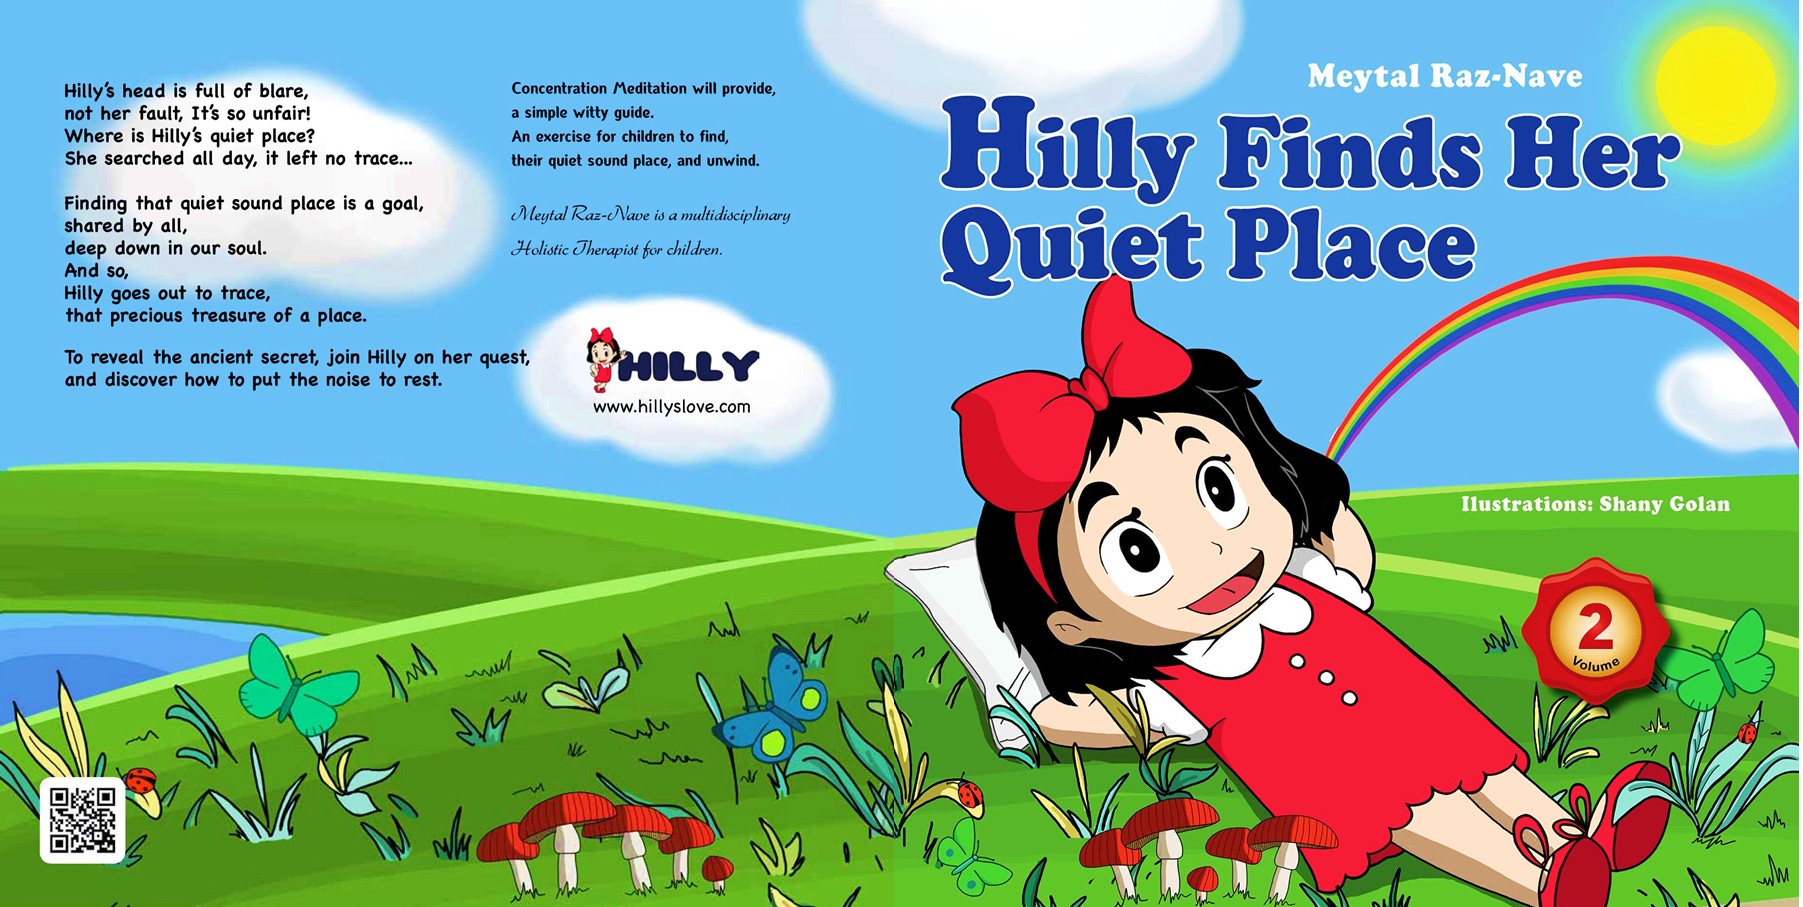 FREE: Hilly finds her quiet place by Meytal Raz-Nave by Meytal Raz-Nave